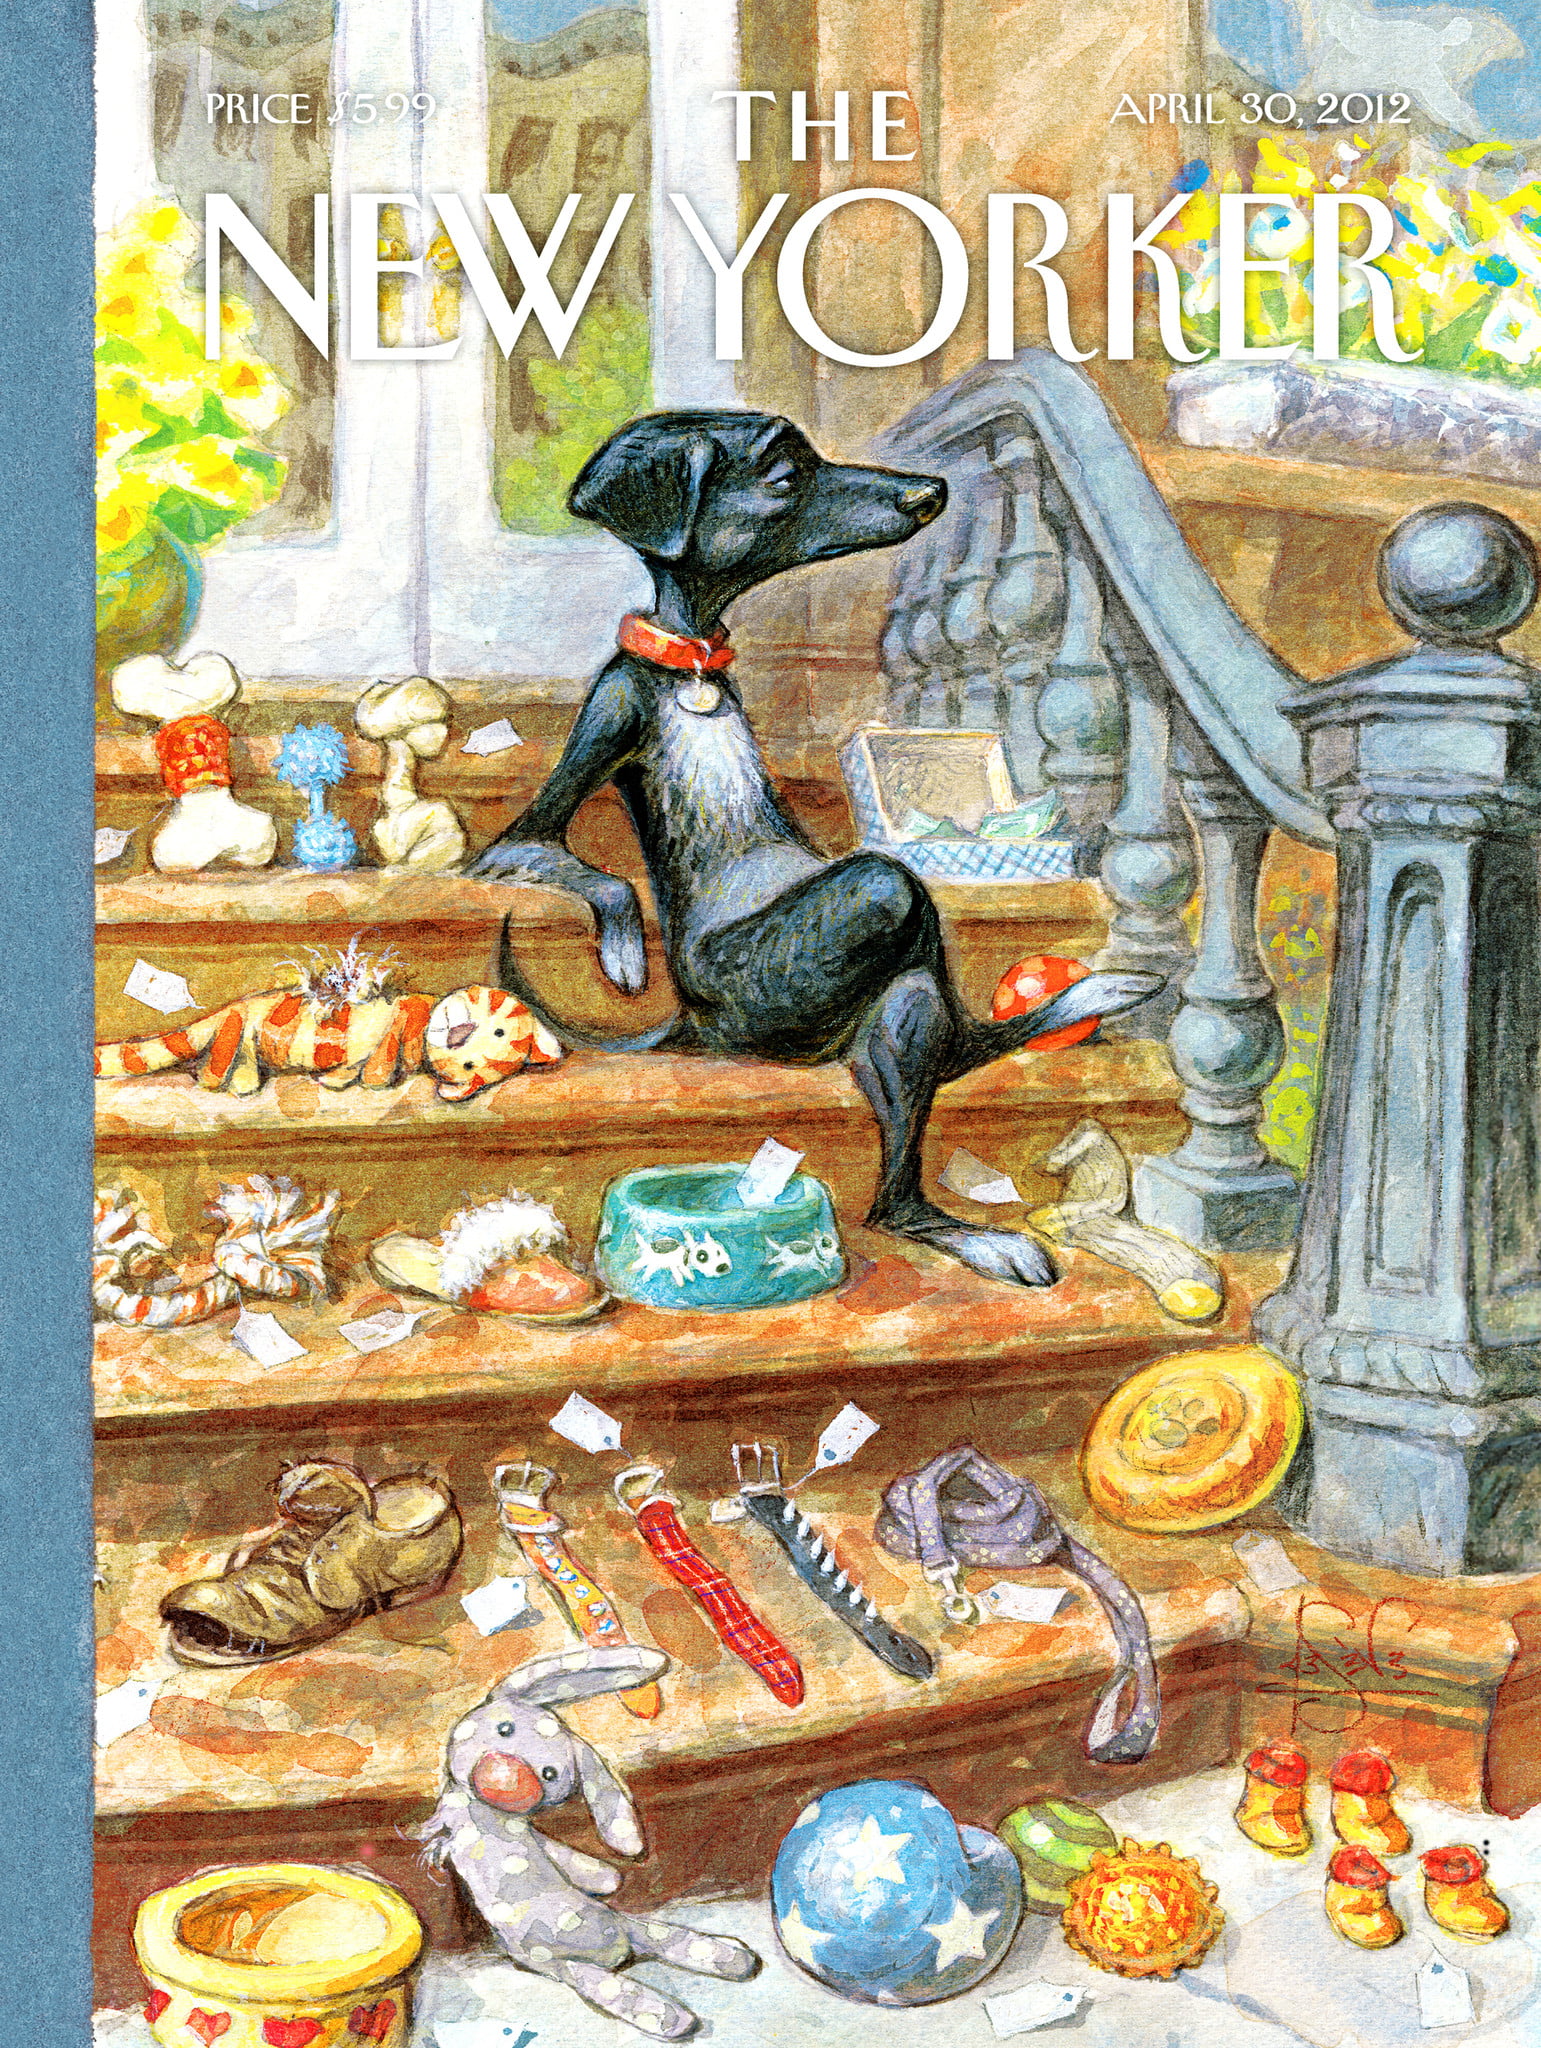 The New Yorker Tag Sale 1000 PC Jigsaw Puzzle